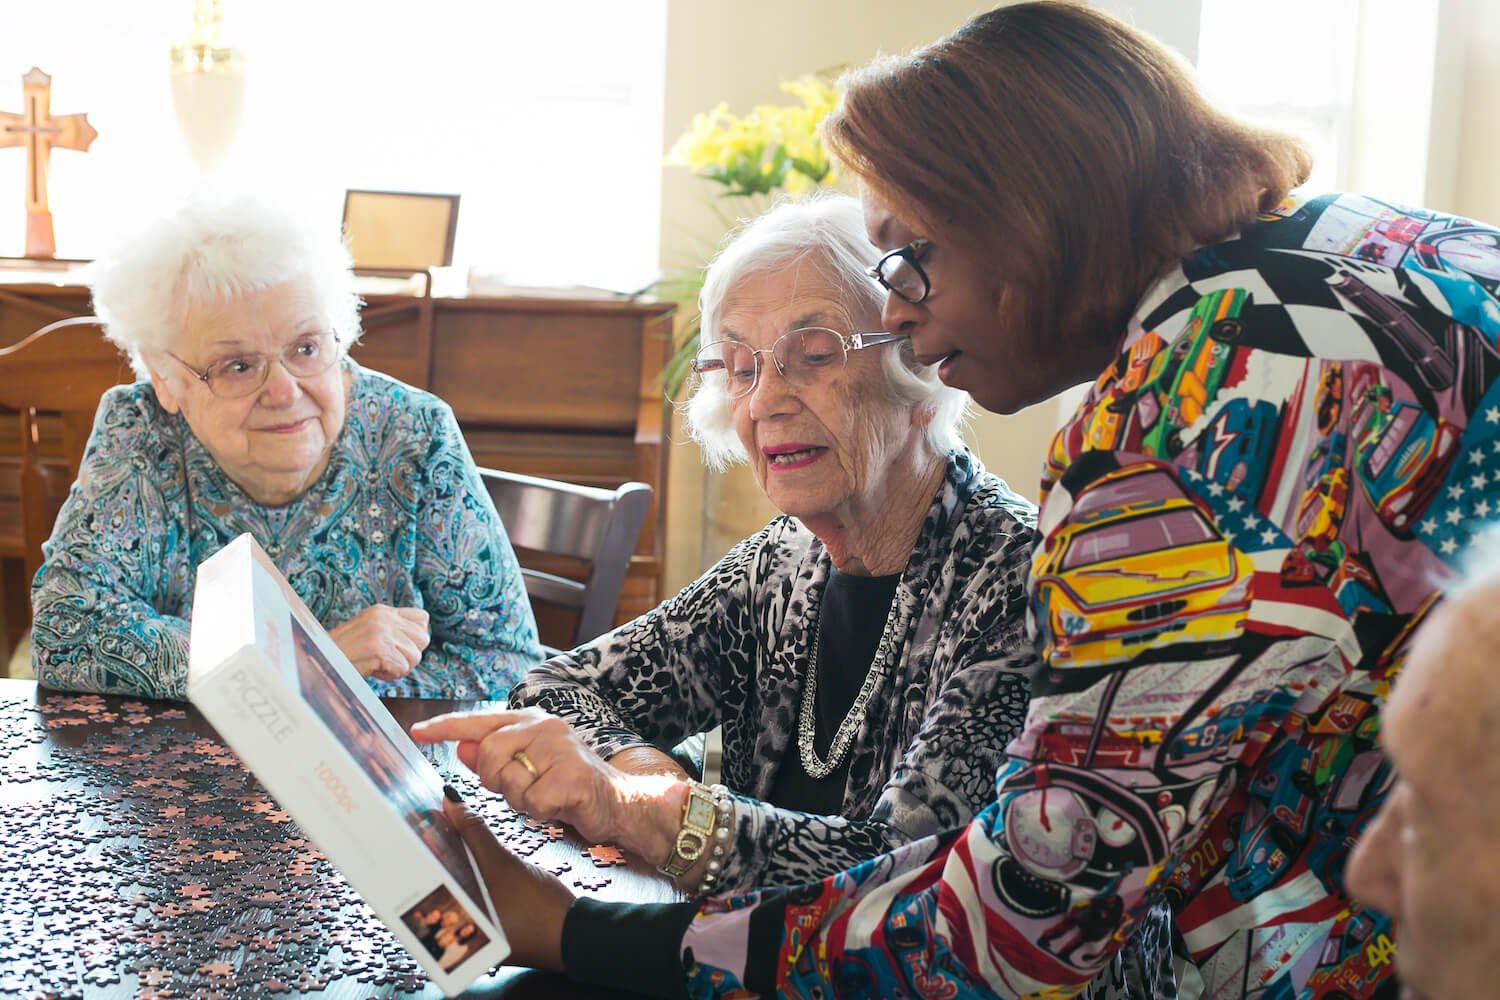 Staff member helping two senior women with a jigsaw puzzle